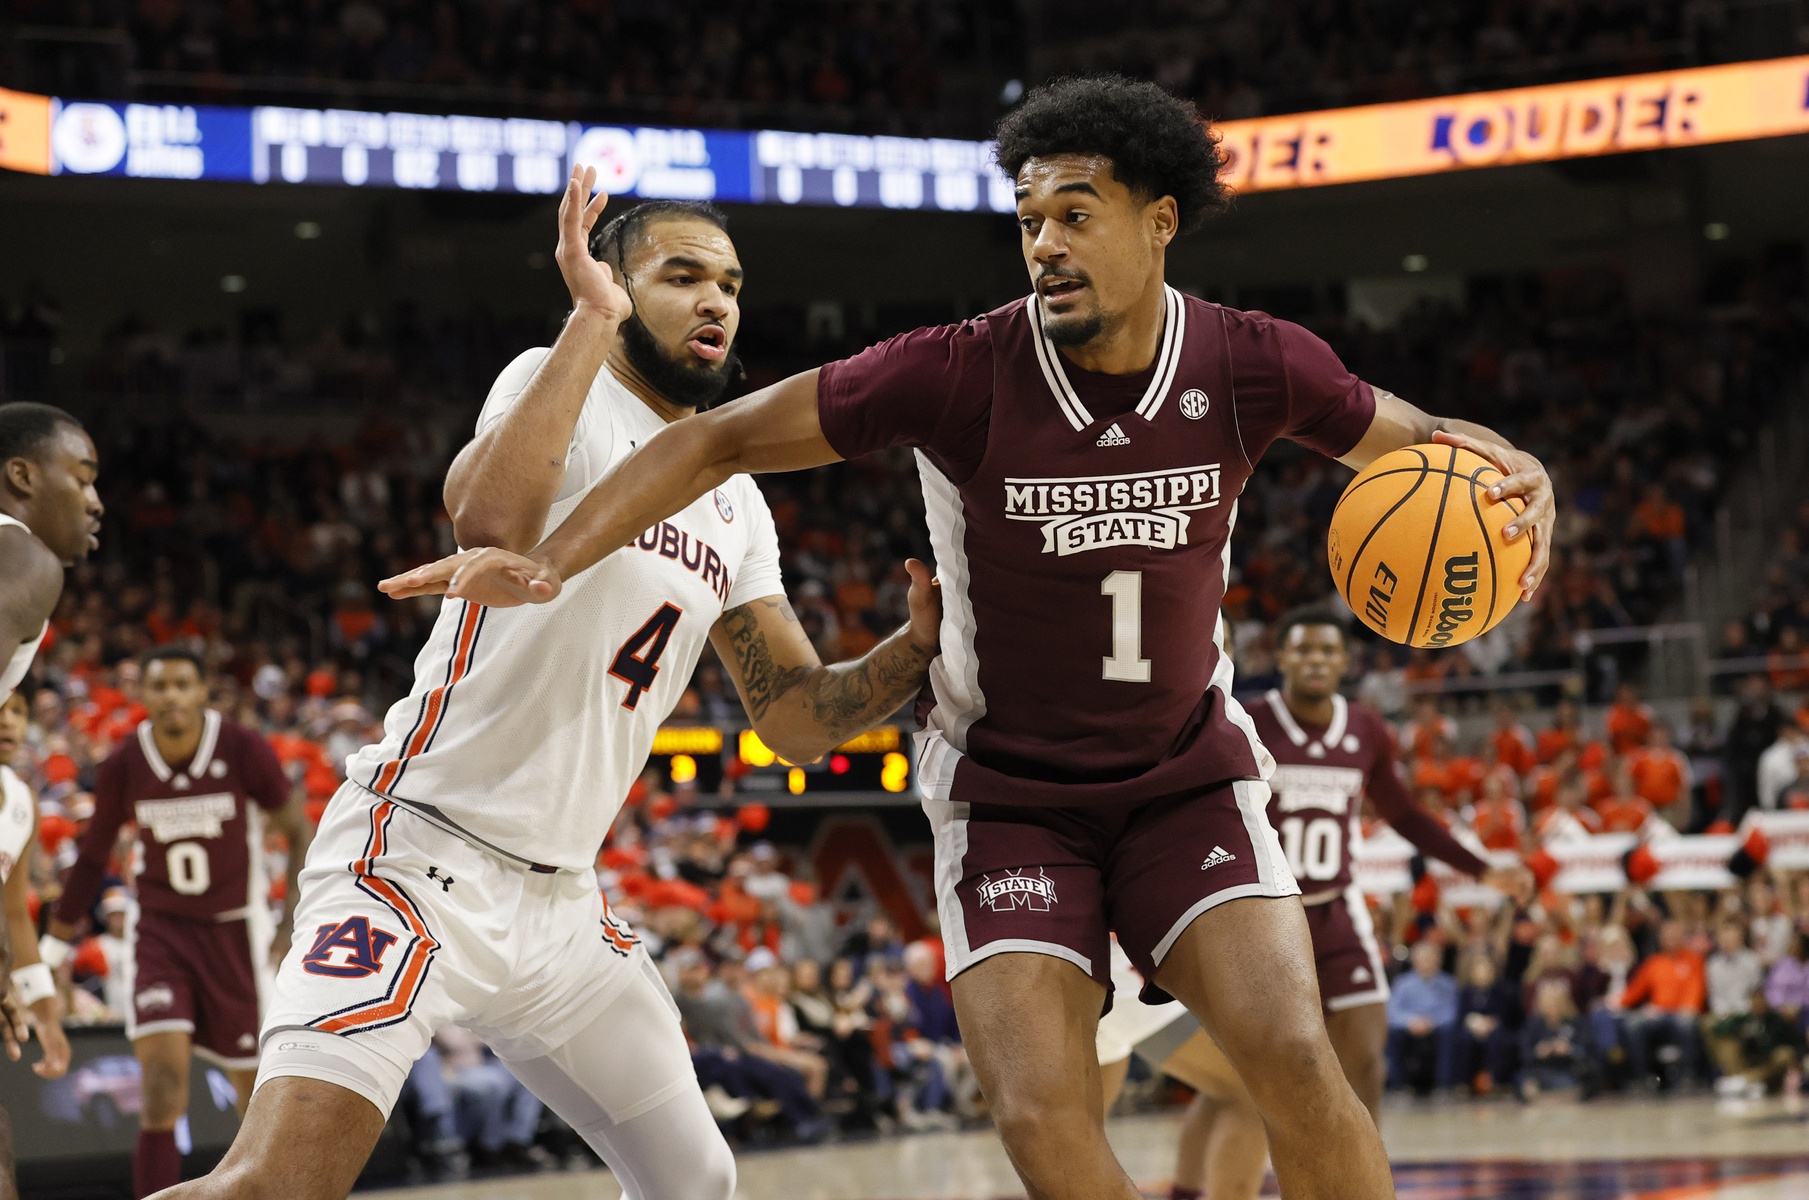 TCU Horned Frogs vs Mississippi State Bulldogs Prediction, 1/28/2023 College Basketball Picks, Best Bets & Odds